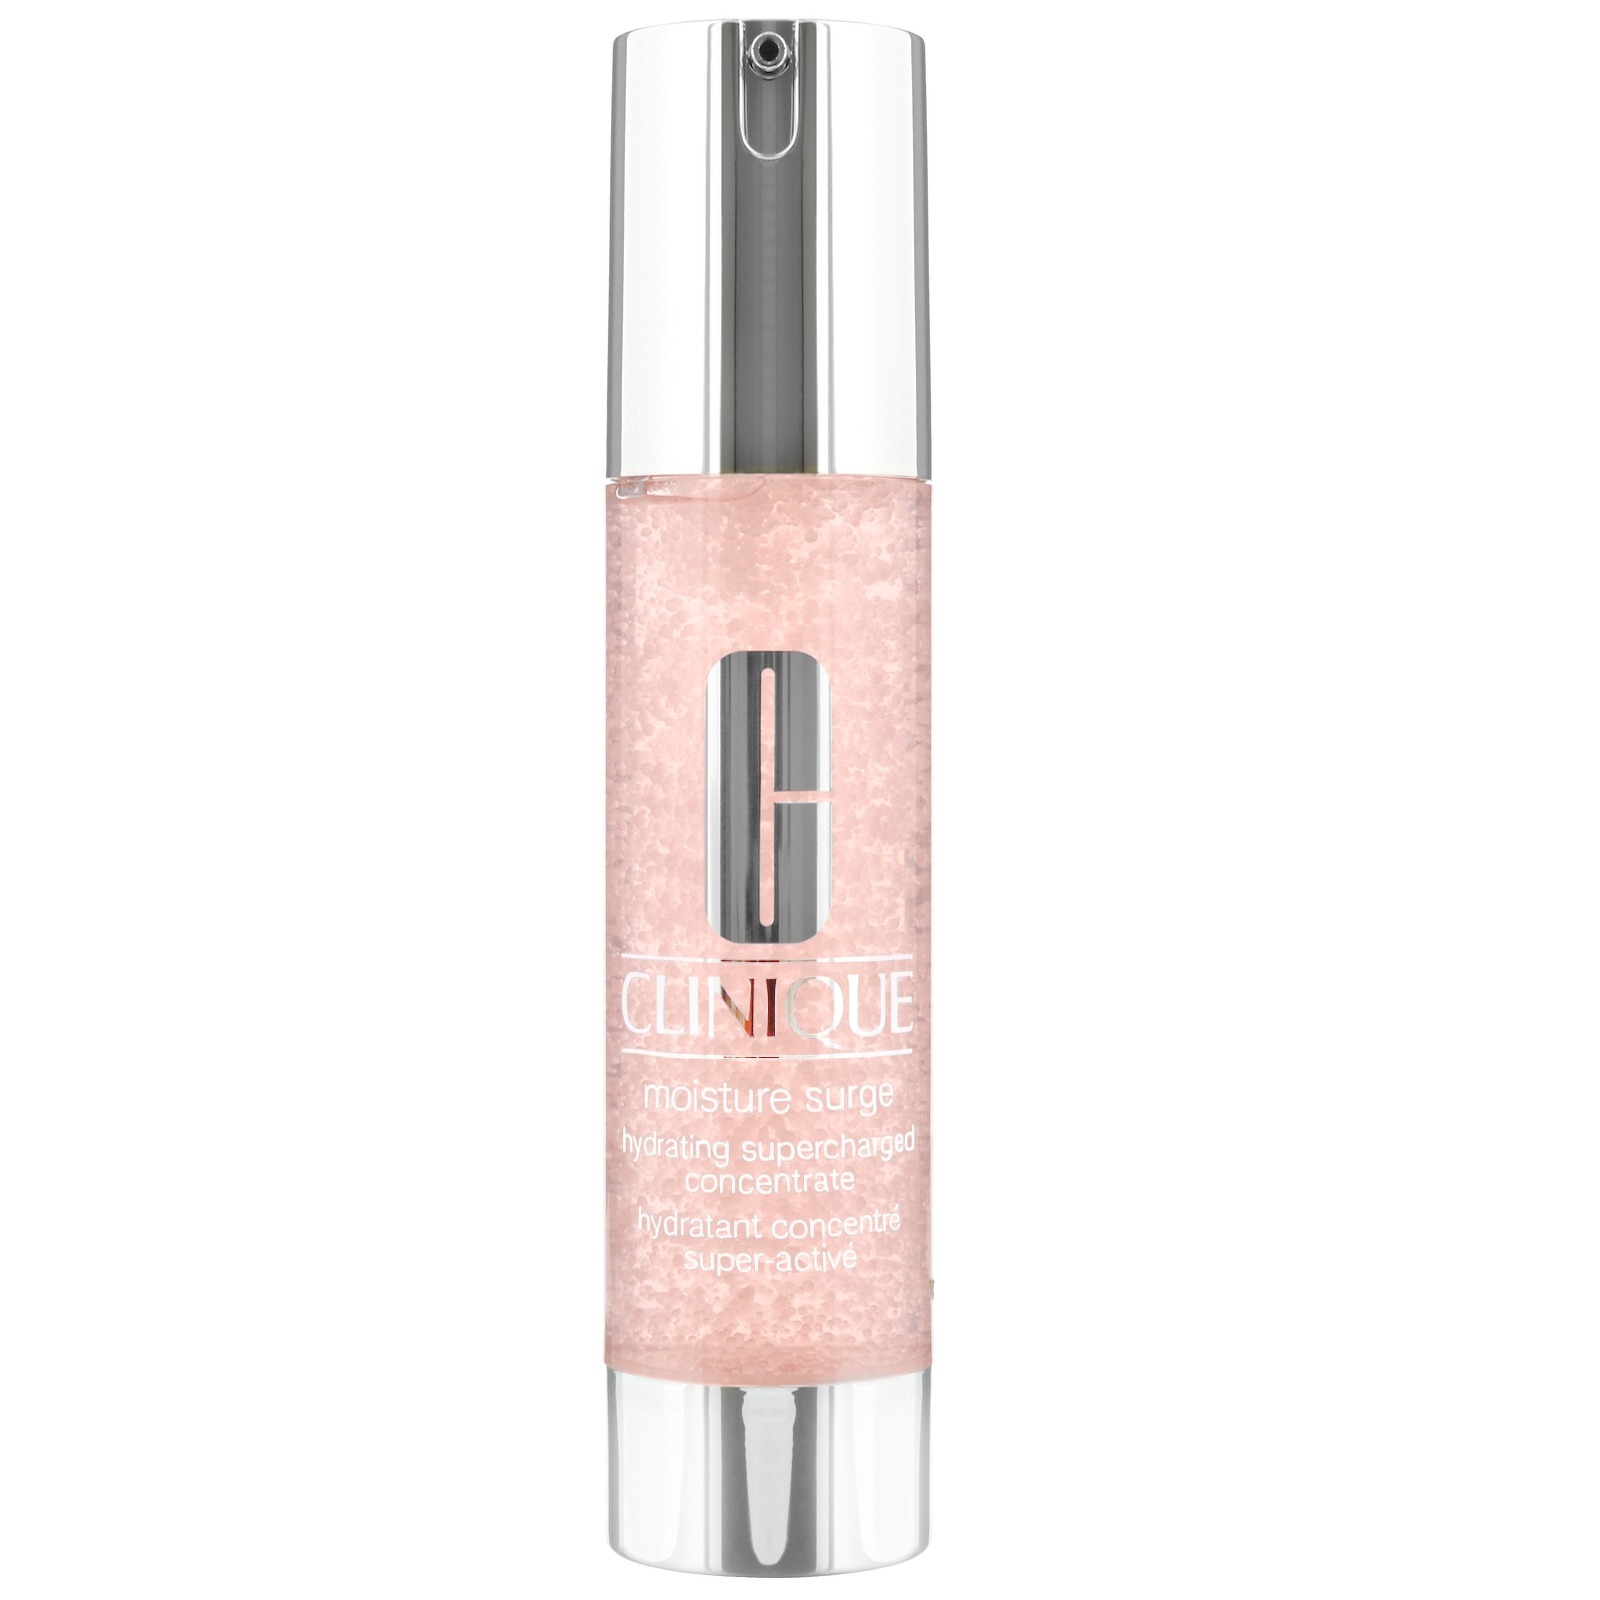 CLINIQUE 1.6fl.oz./48ml Moisture Surge Hydrating Supercharged Concentrate Gel